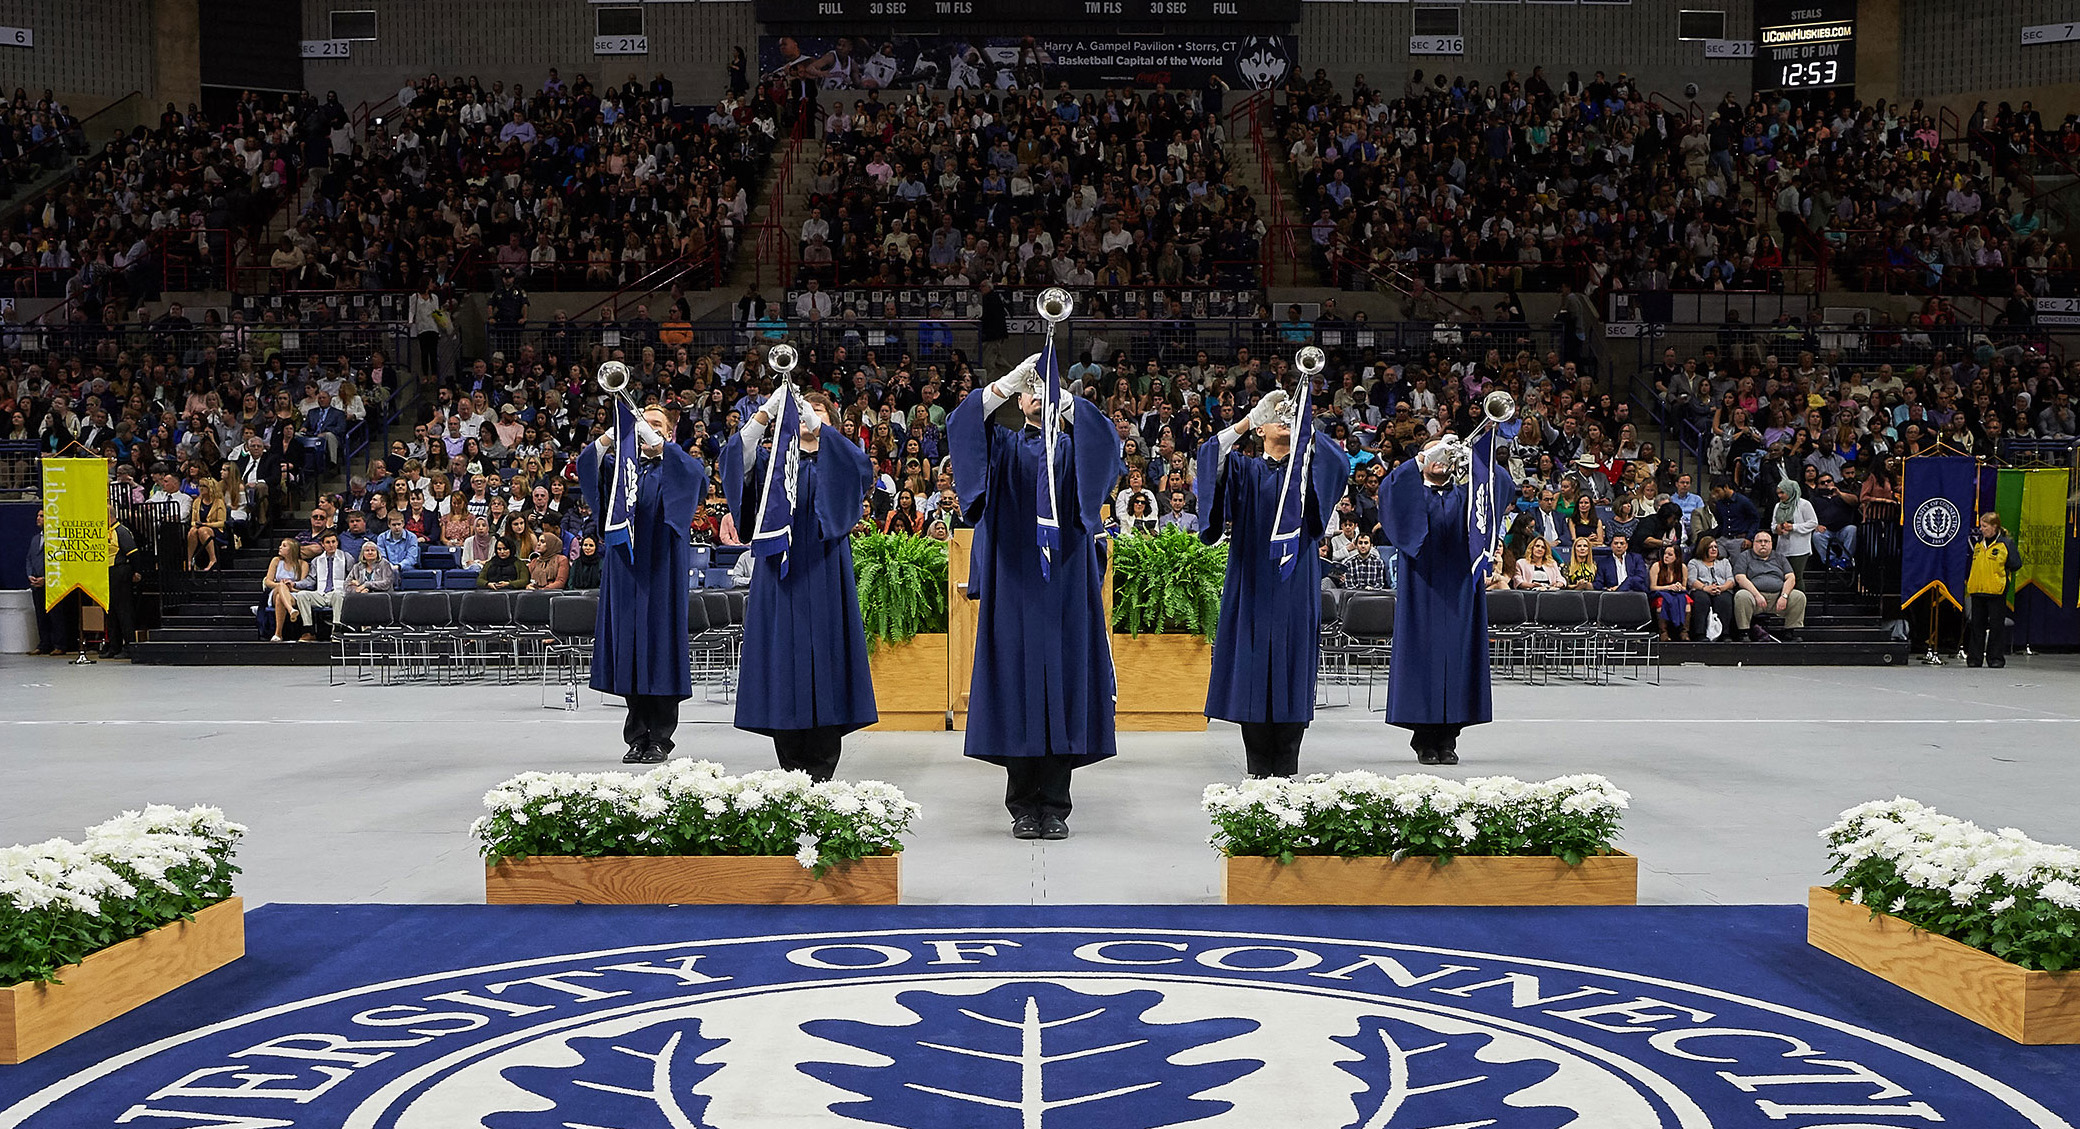 Herald trumpeters play at Commencement in Gampel Pavilion with University of Connecticut seal in foreground